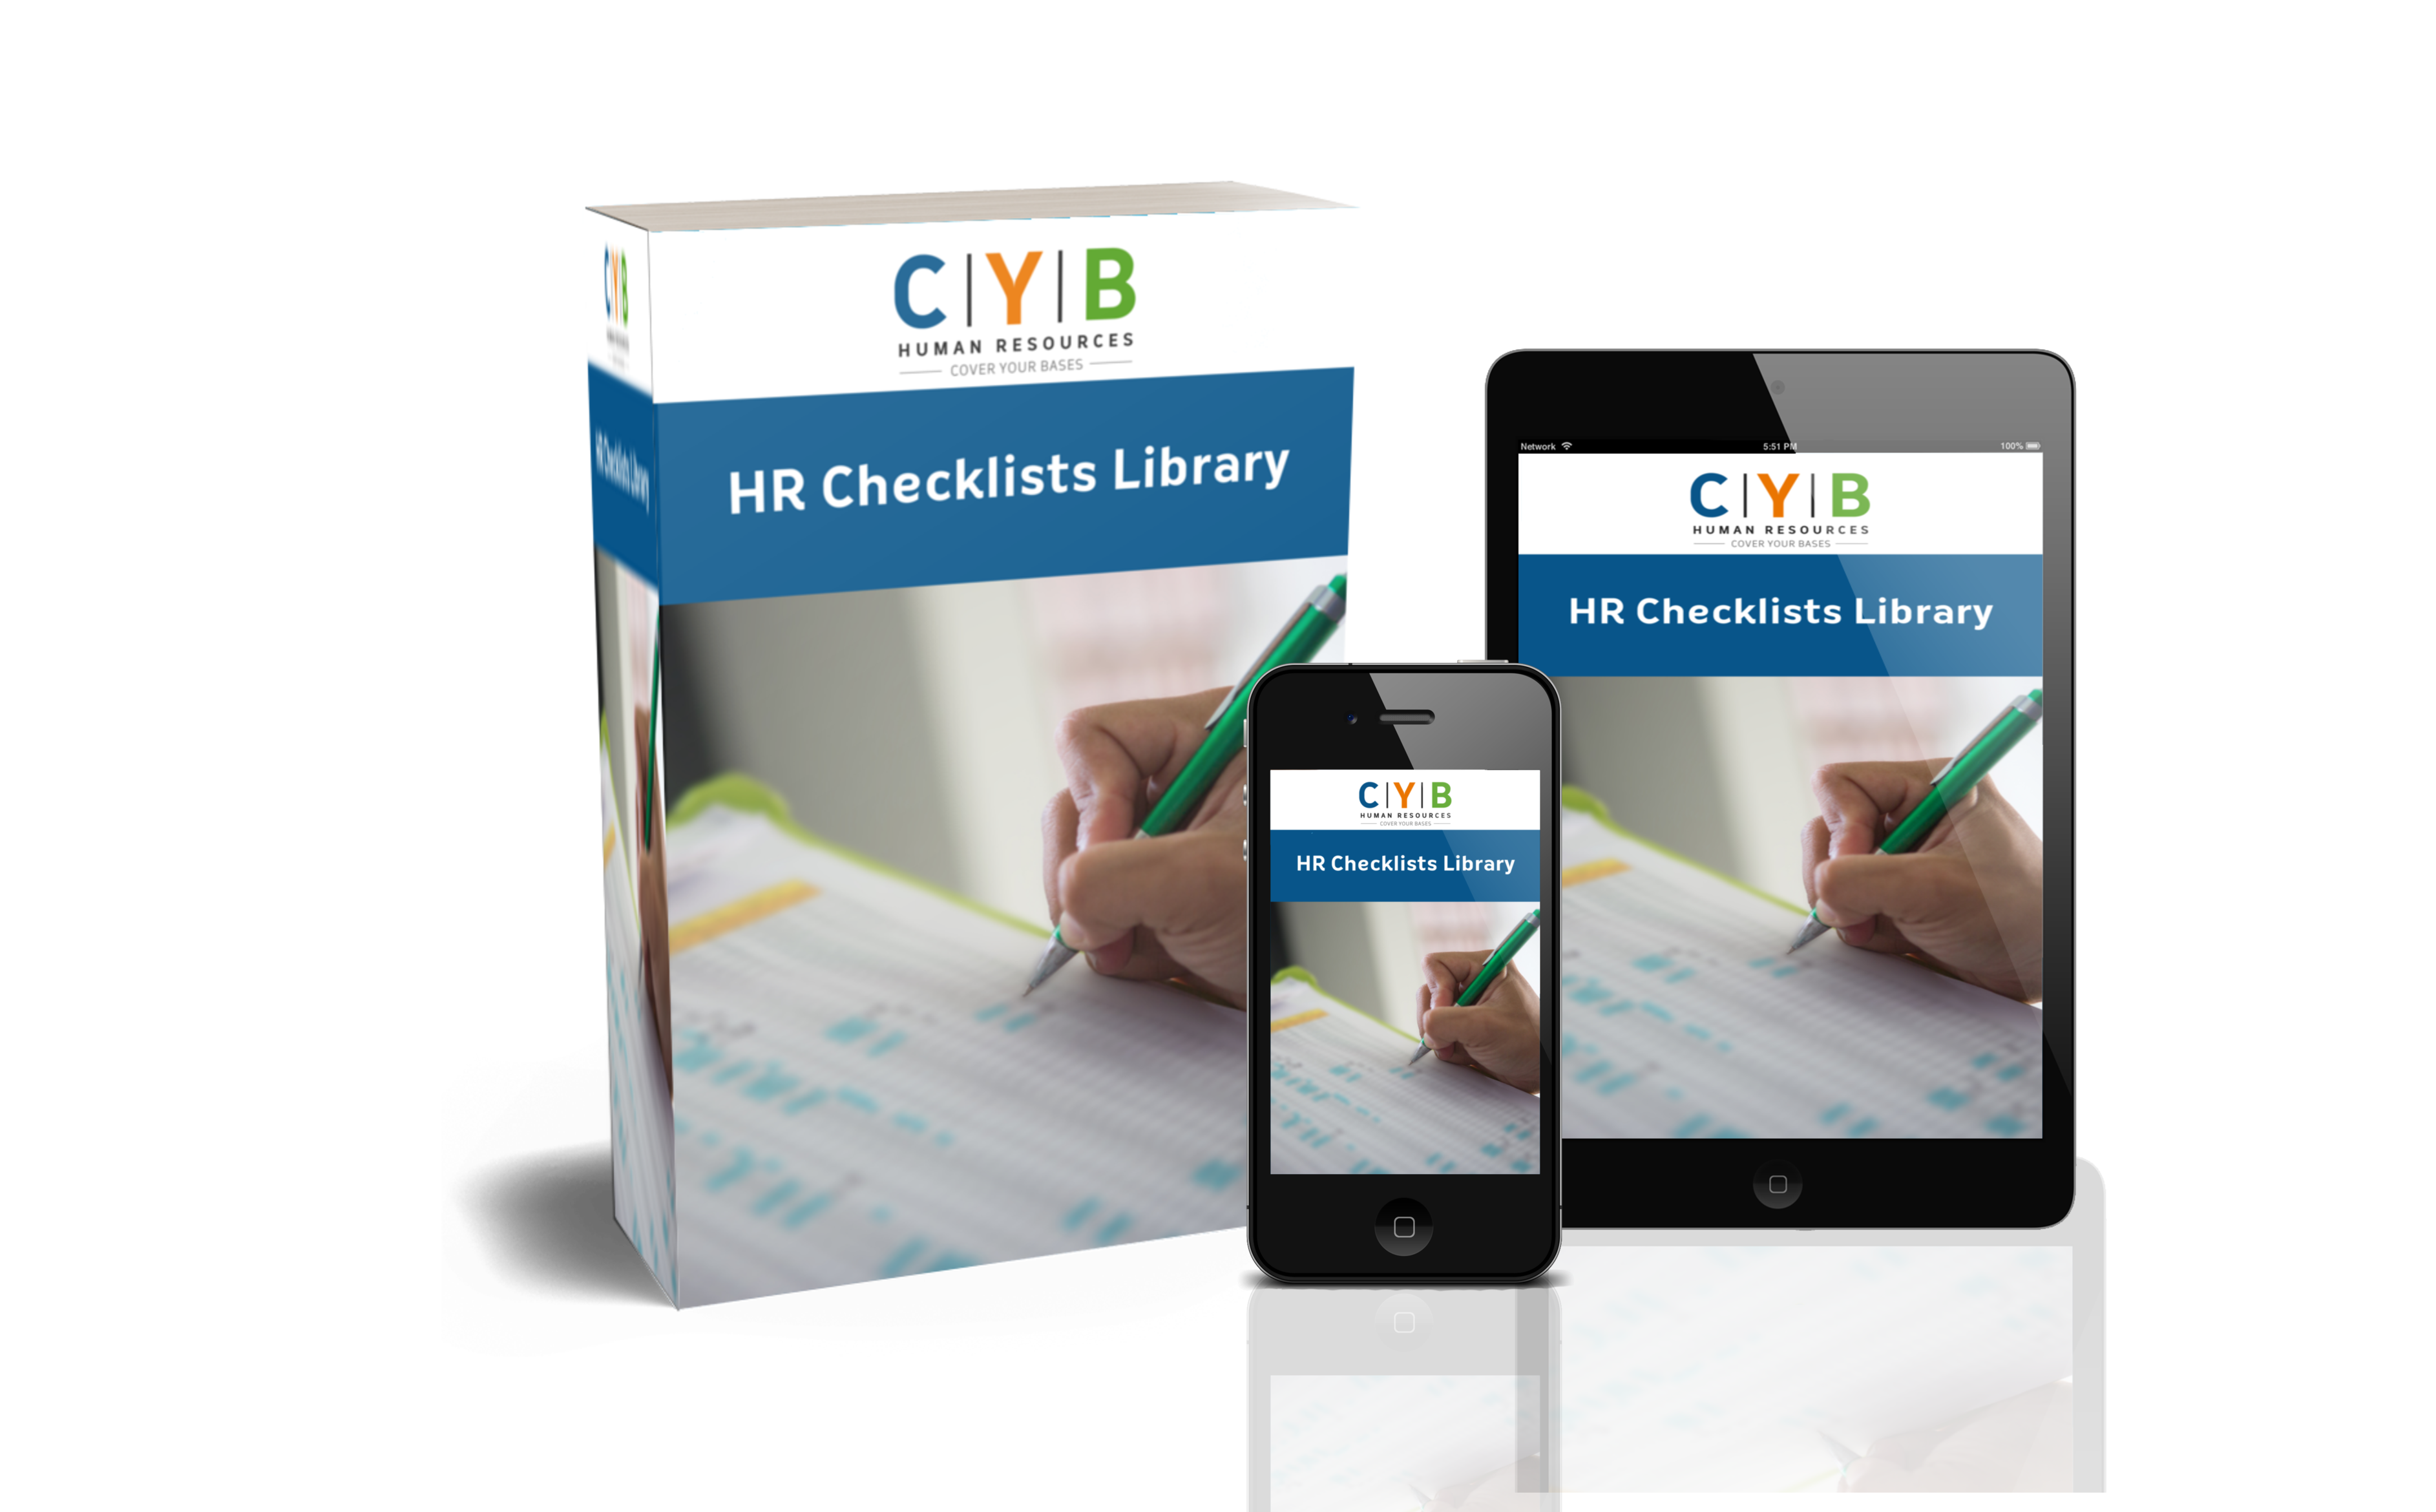 HR Checklists Library